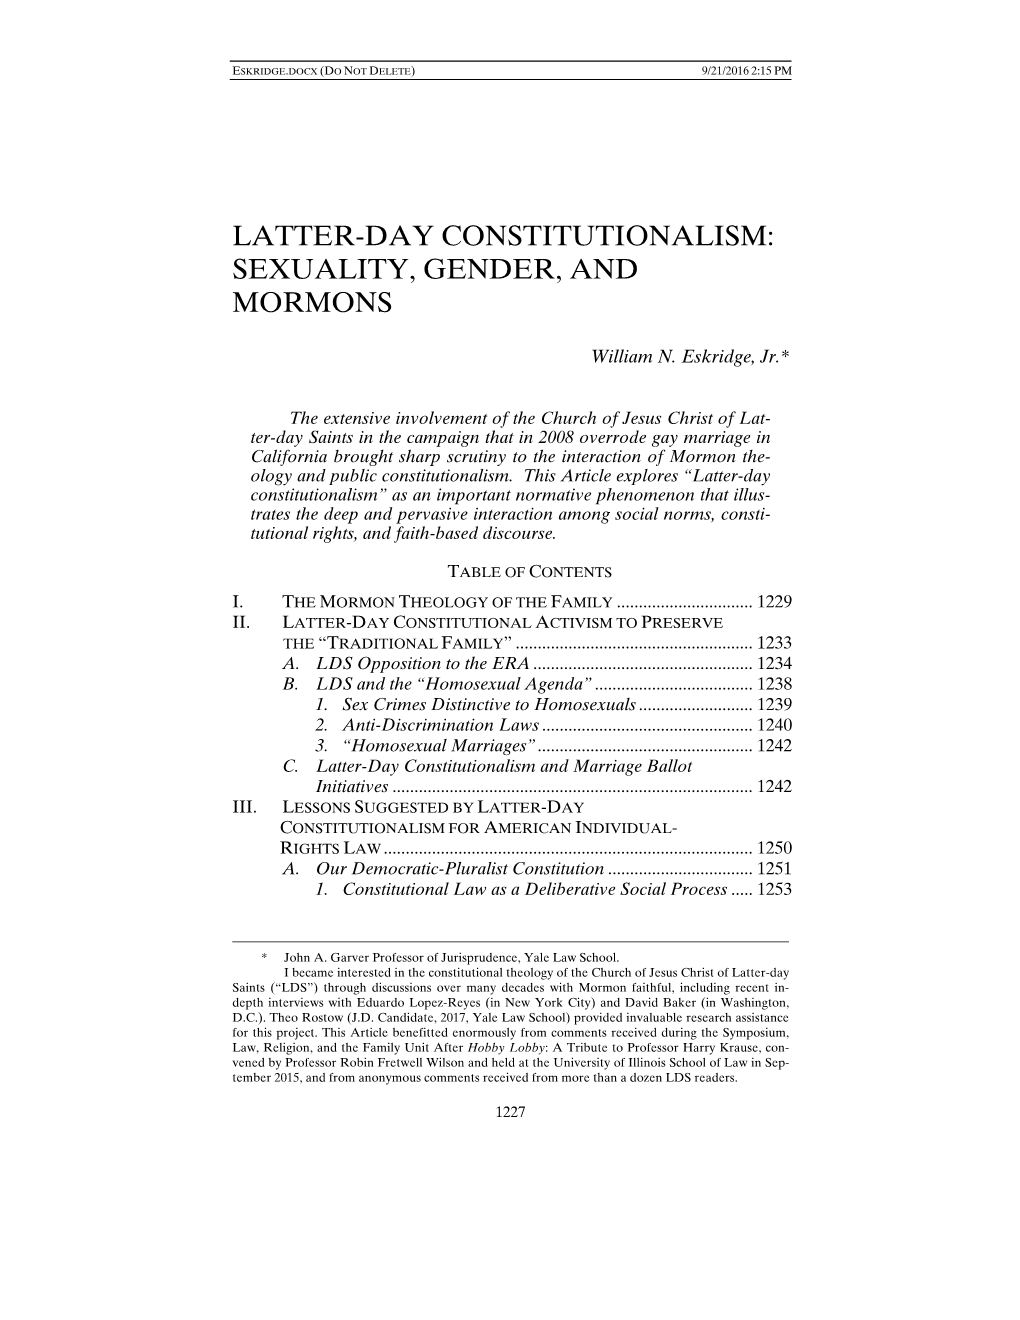 Latter-Day Constitutionalism: Sexuality, Gender, and Mormons